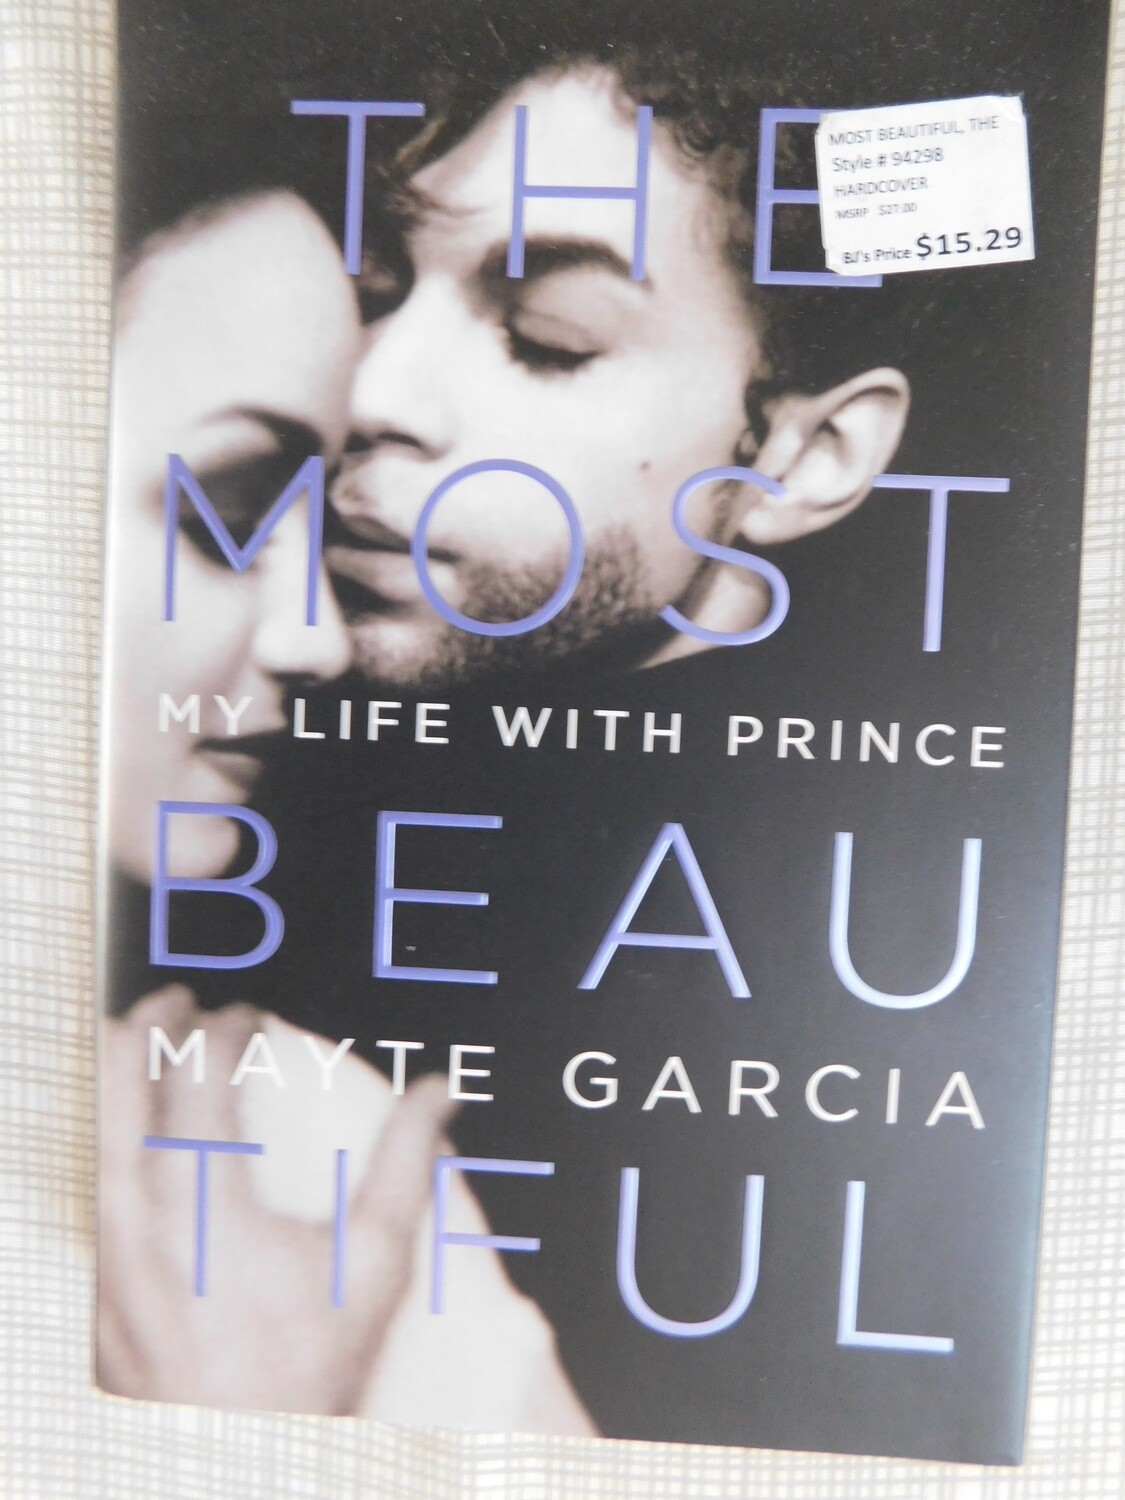 The Most Beautiful - My Life with Prince